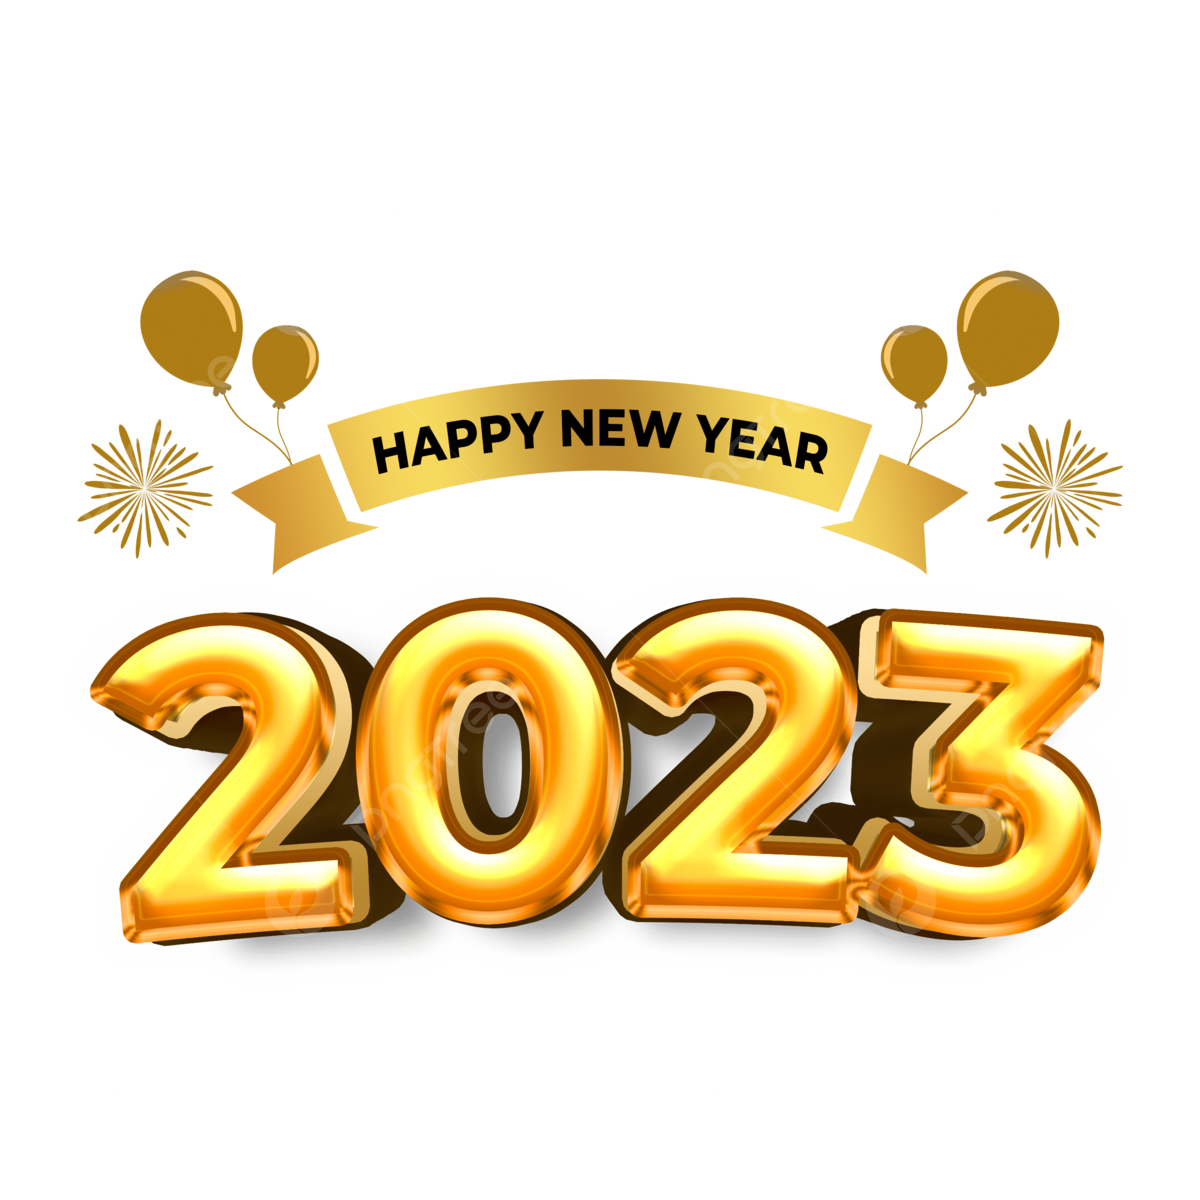 Happy New Year 2023 PNG Transparent Image Free Download